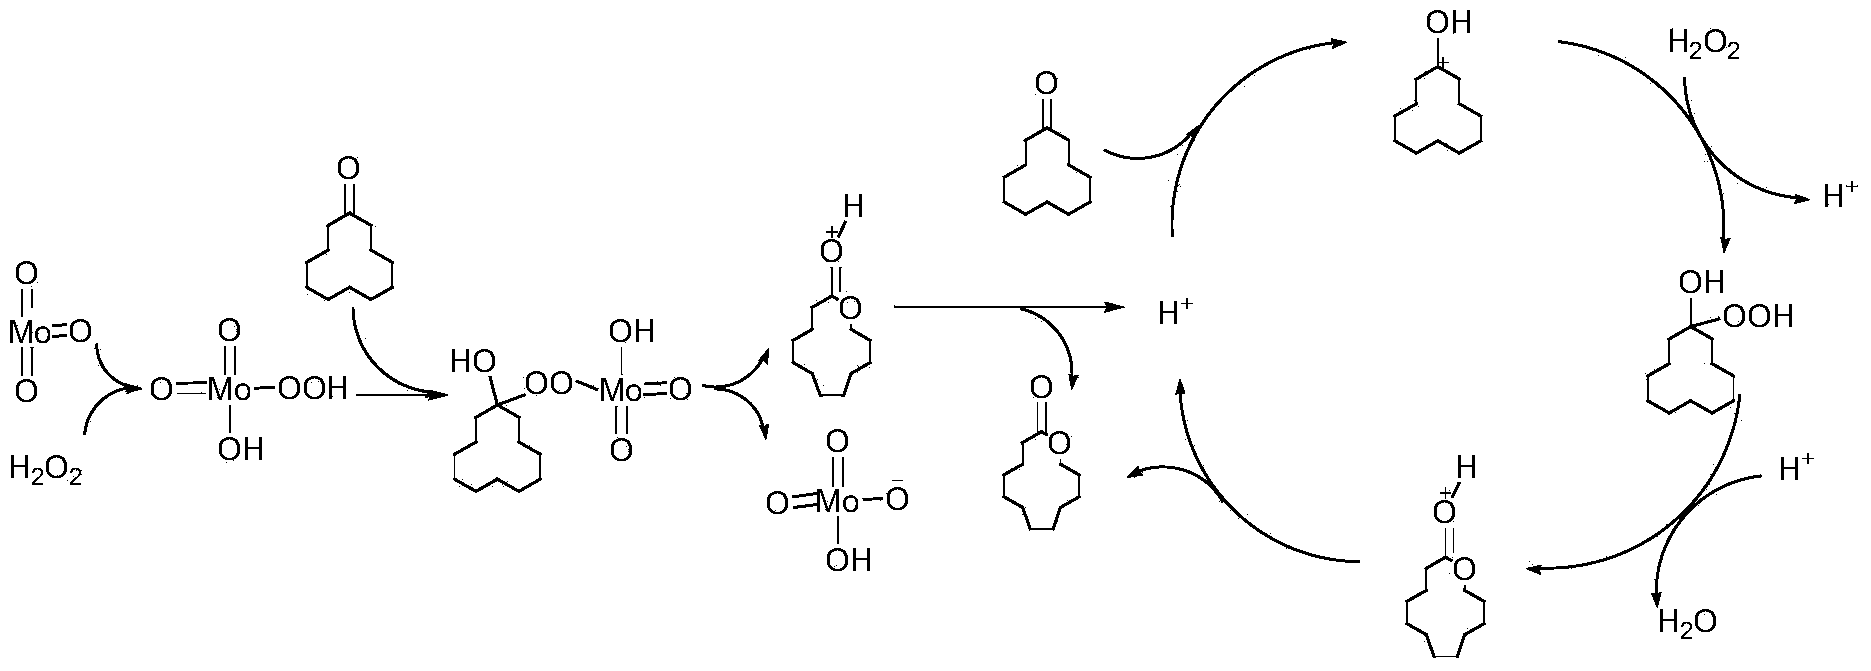 Method for synthesizing cyclododecalactone by catalytic oxidation of cyclododecanone